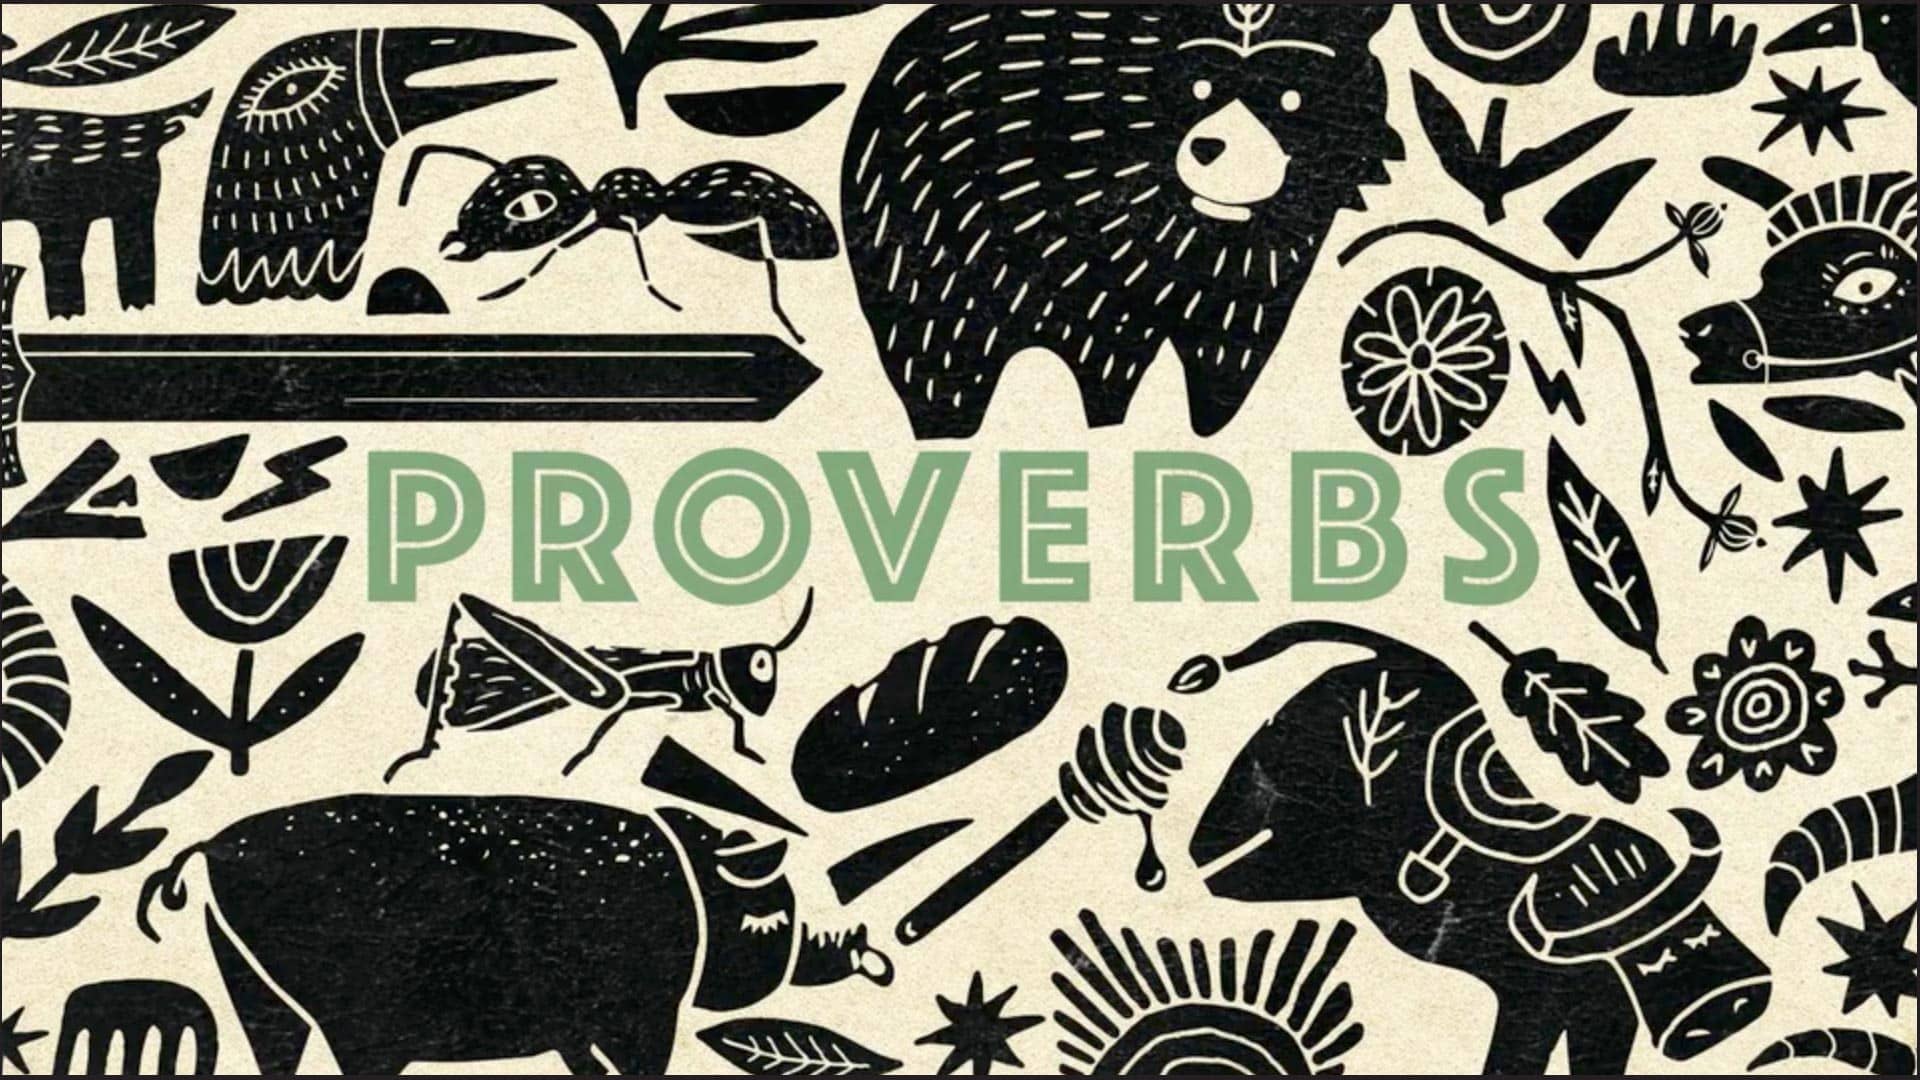 Proverbs graphic